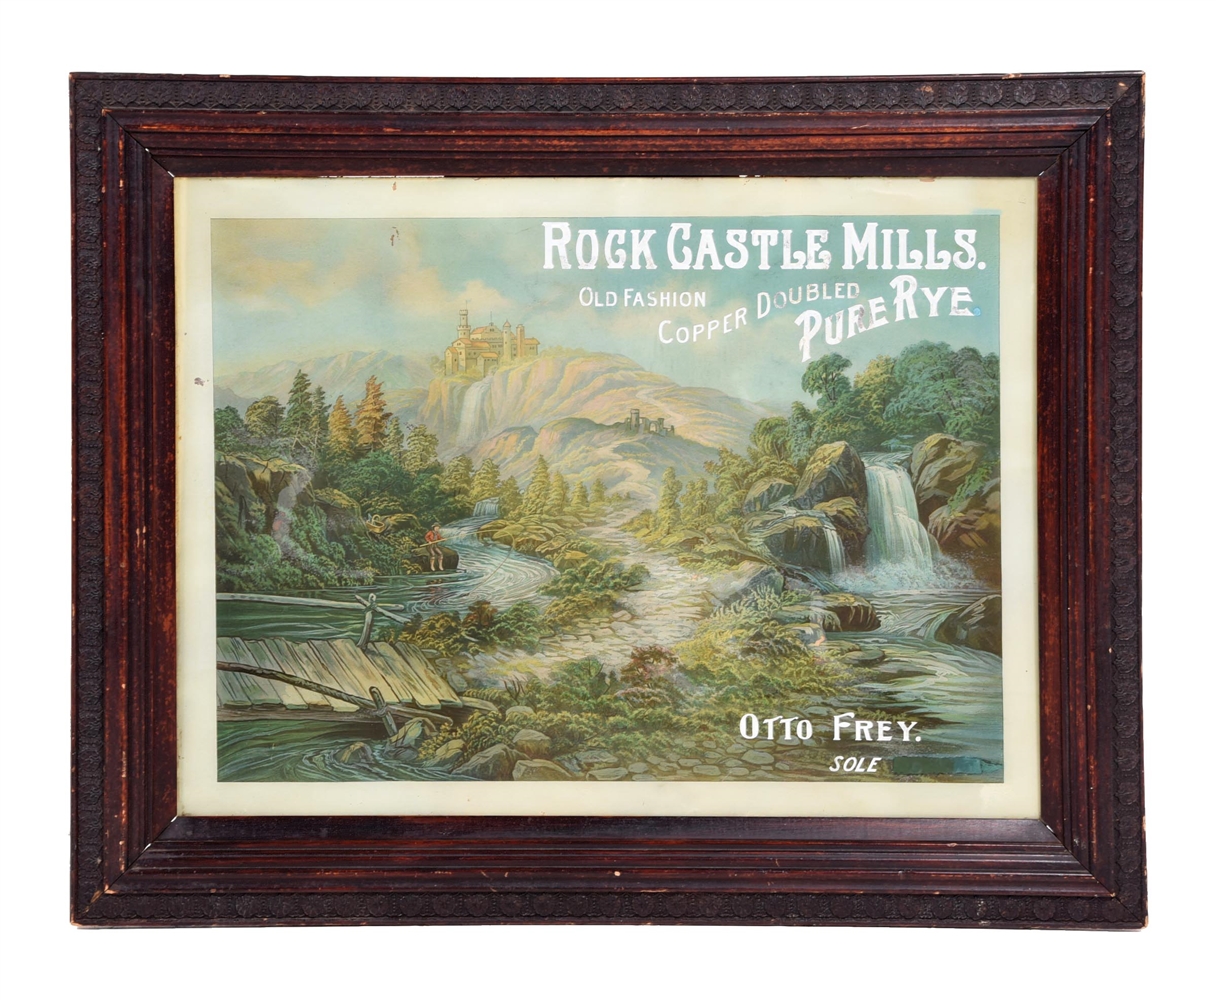 ROCK CASTLE MILLS PURE RYE REVERSE PAINTED GLASS SIGN W/ FLY FISHING GRAPHIC